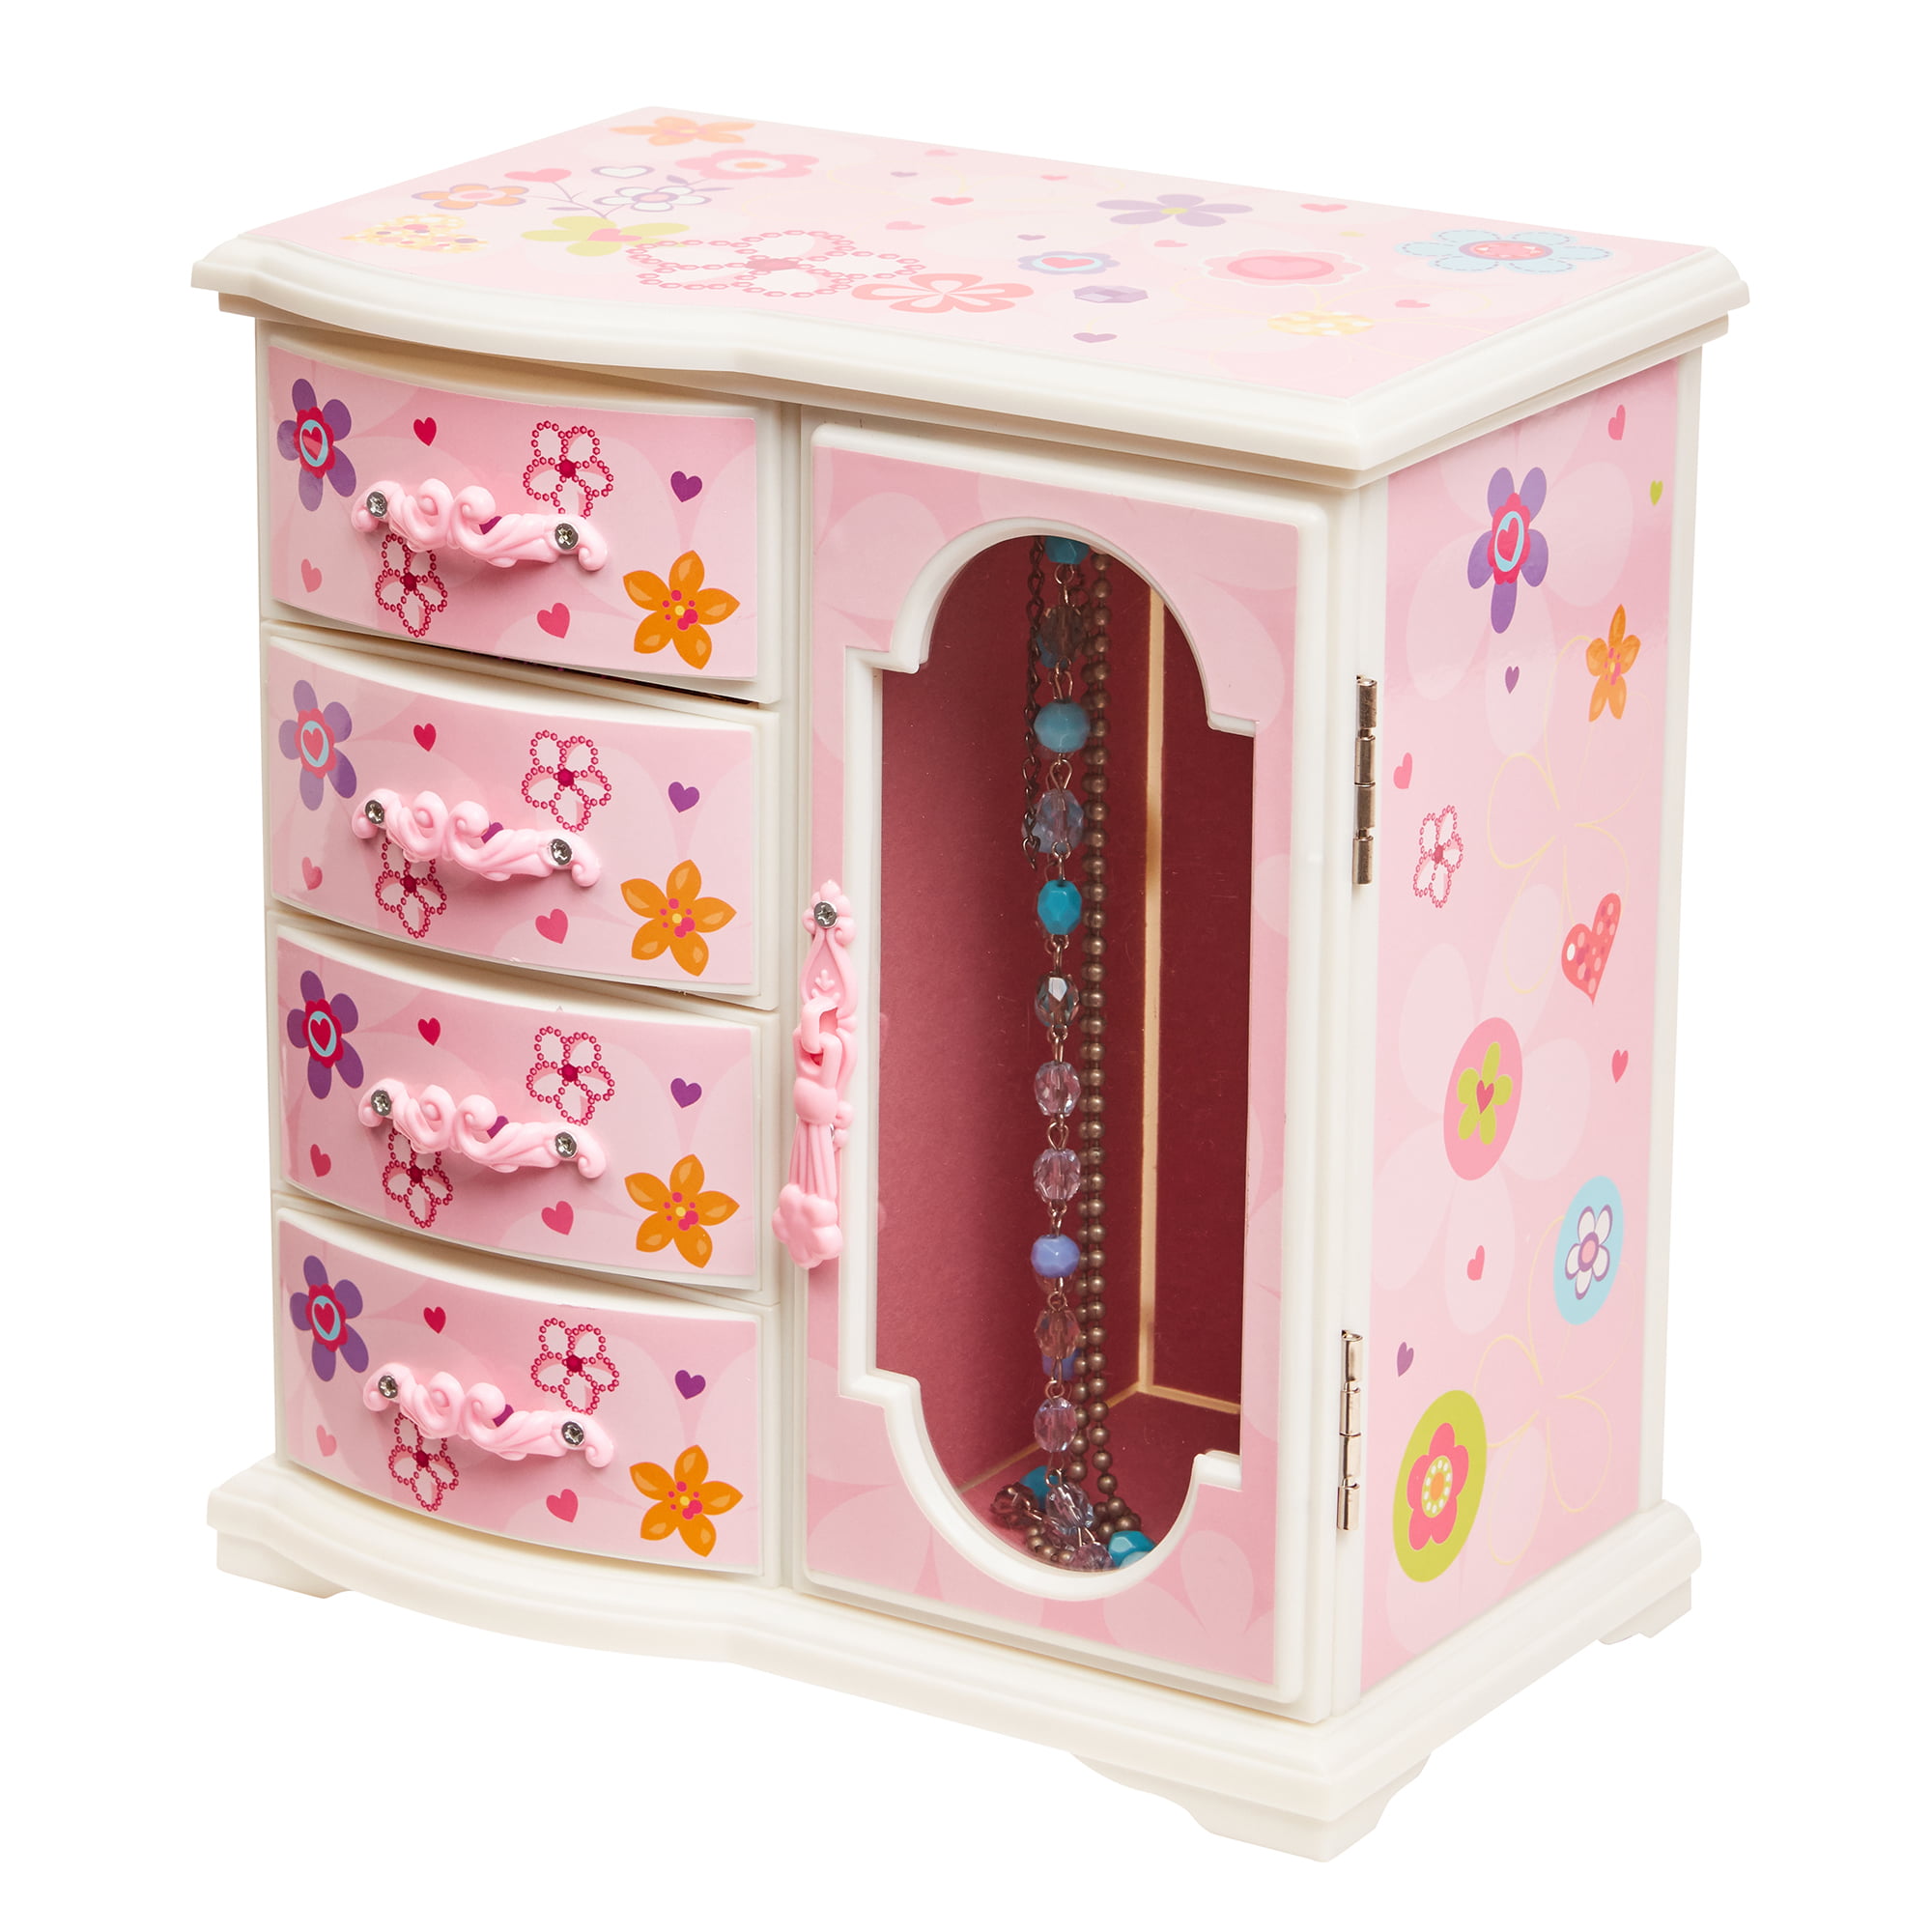 Details about   Christmas gift for a girl Music Jewelry Box 4 drawers  Mirror Velvet Flocked 